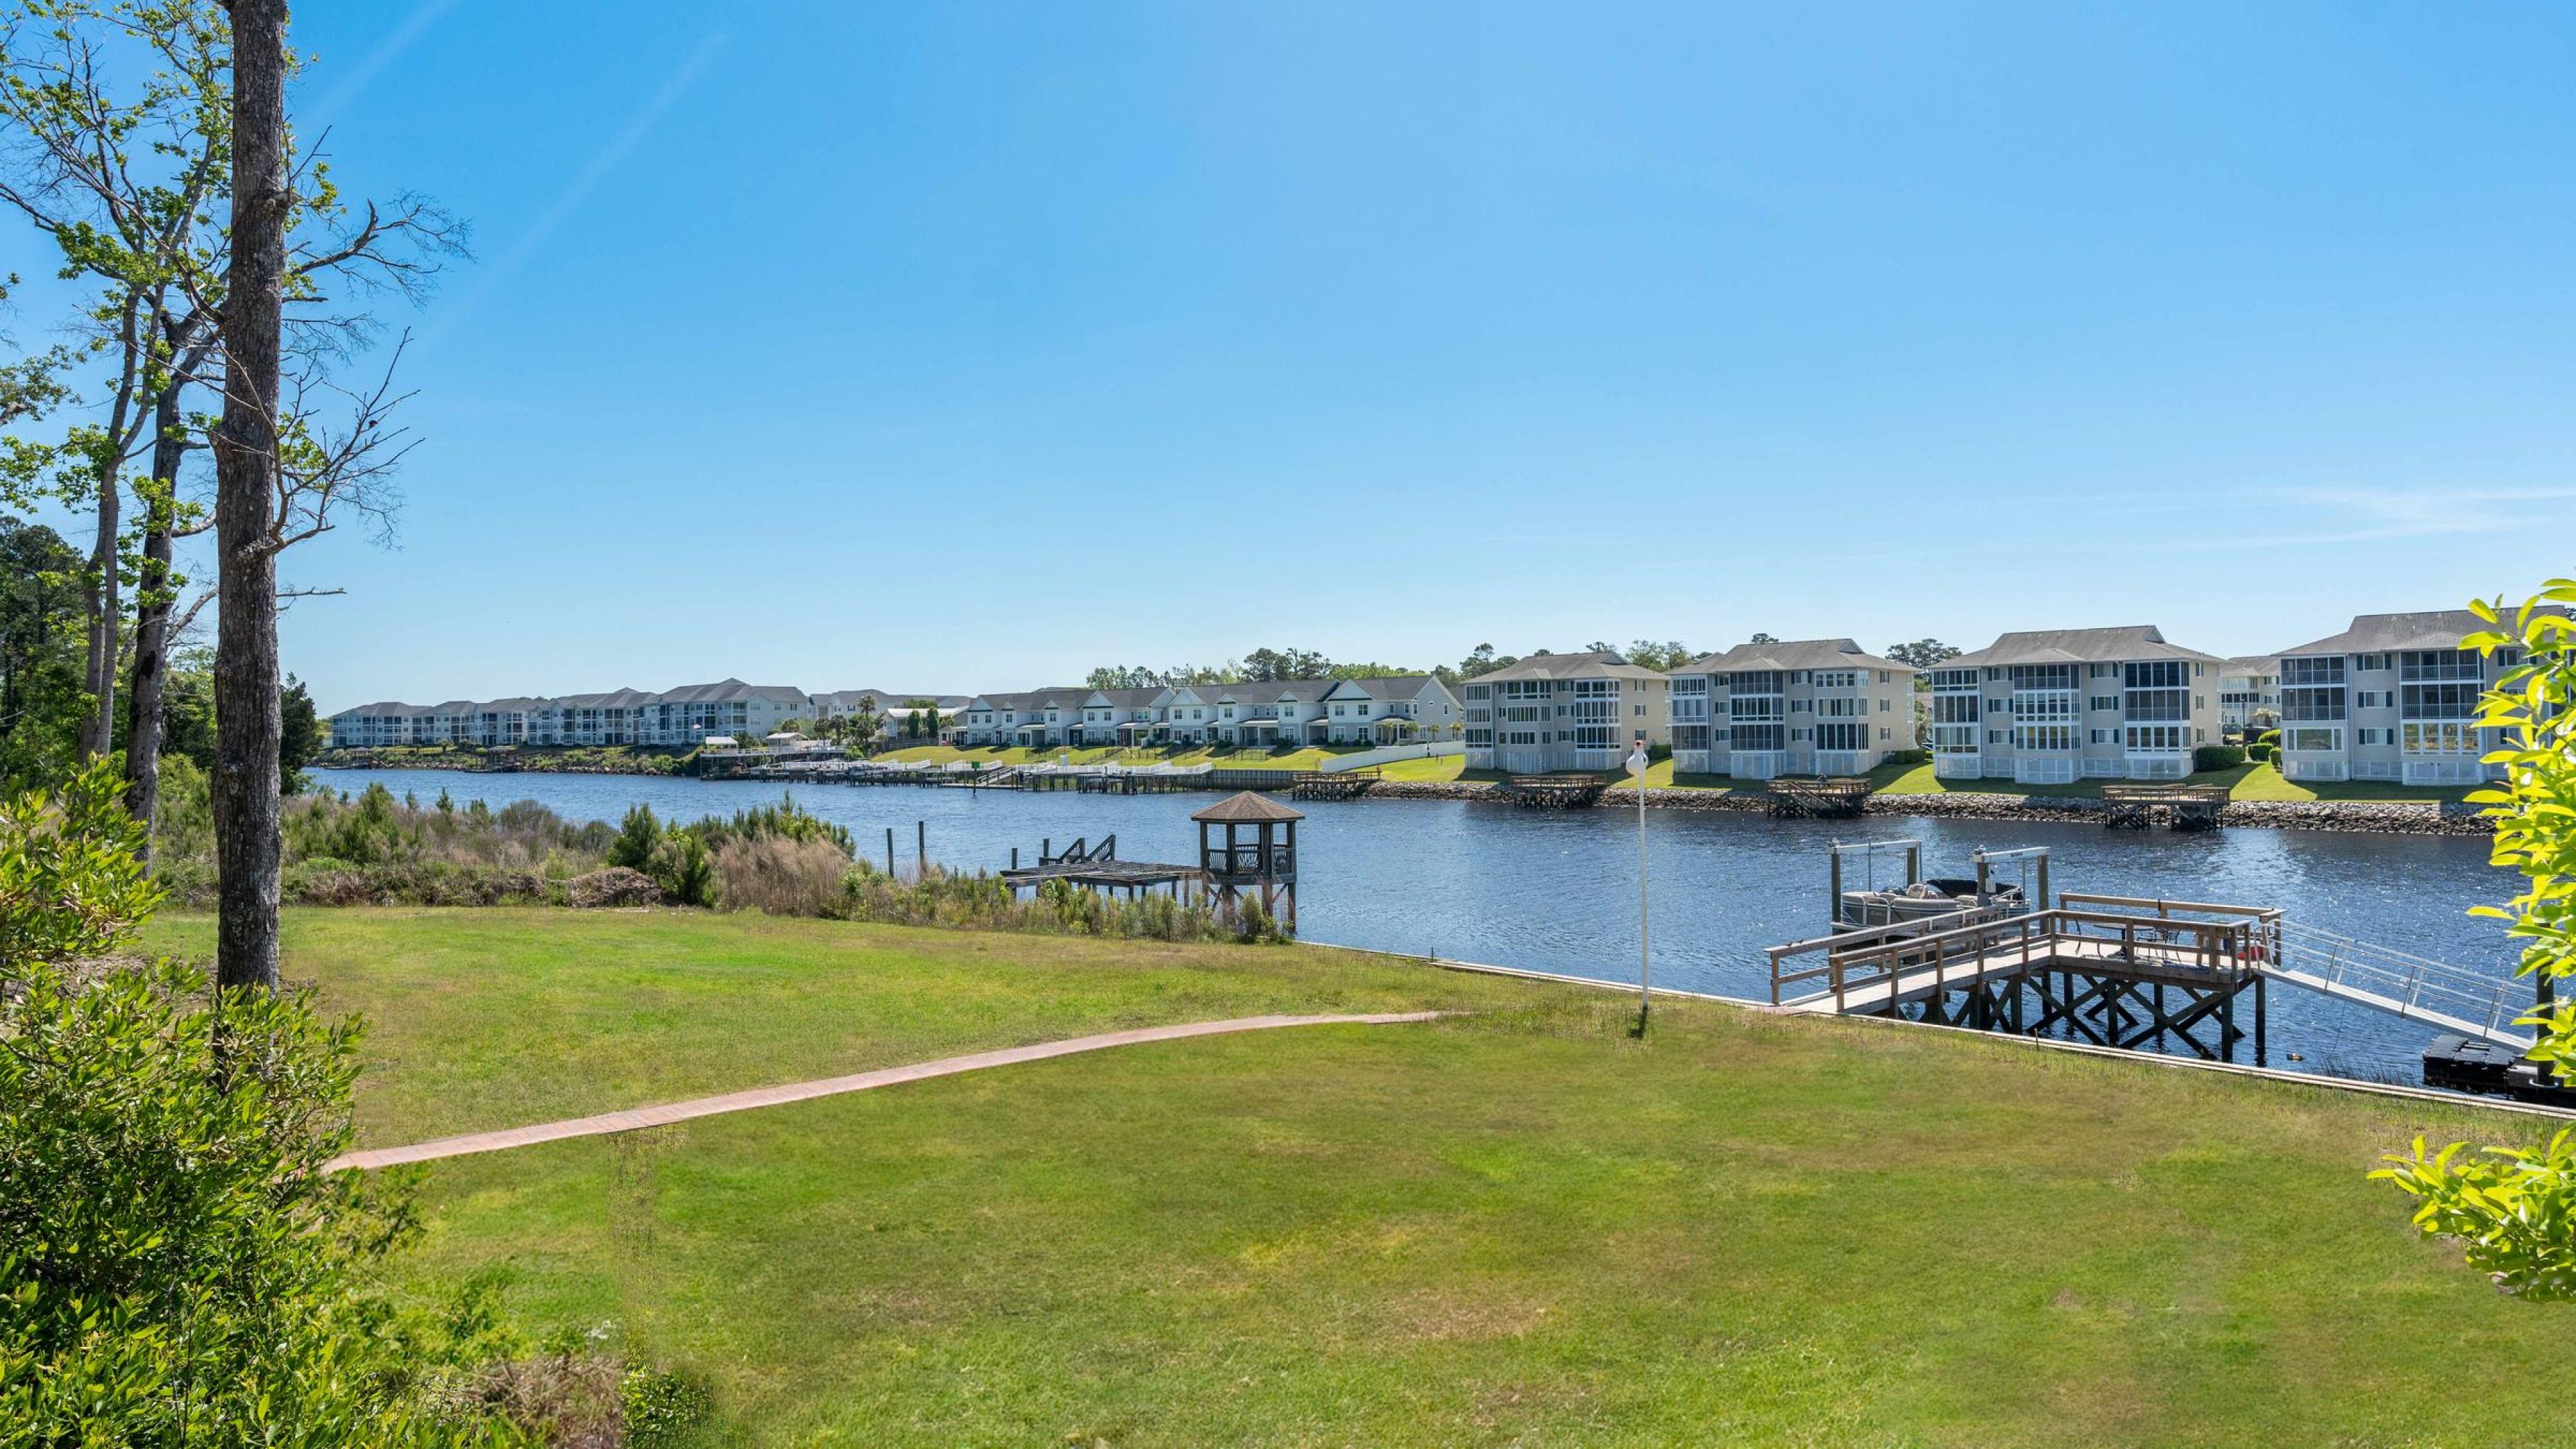 Hawthorne Waterway scene showing a grassy shoreline with a wooden pier and modern waterside homes under a bright sky.